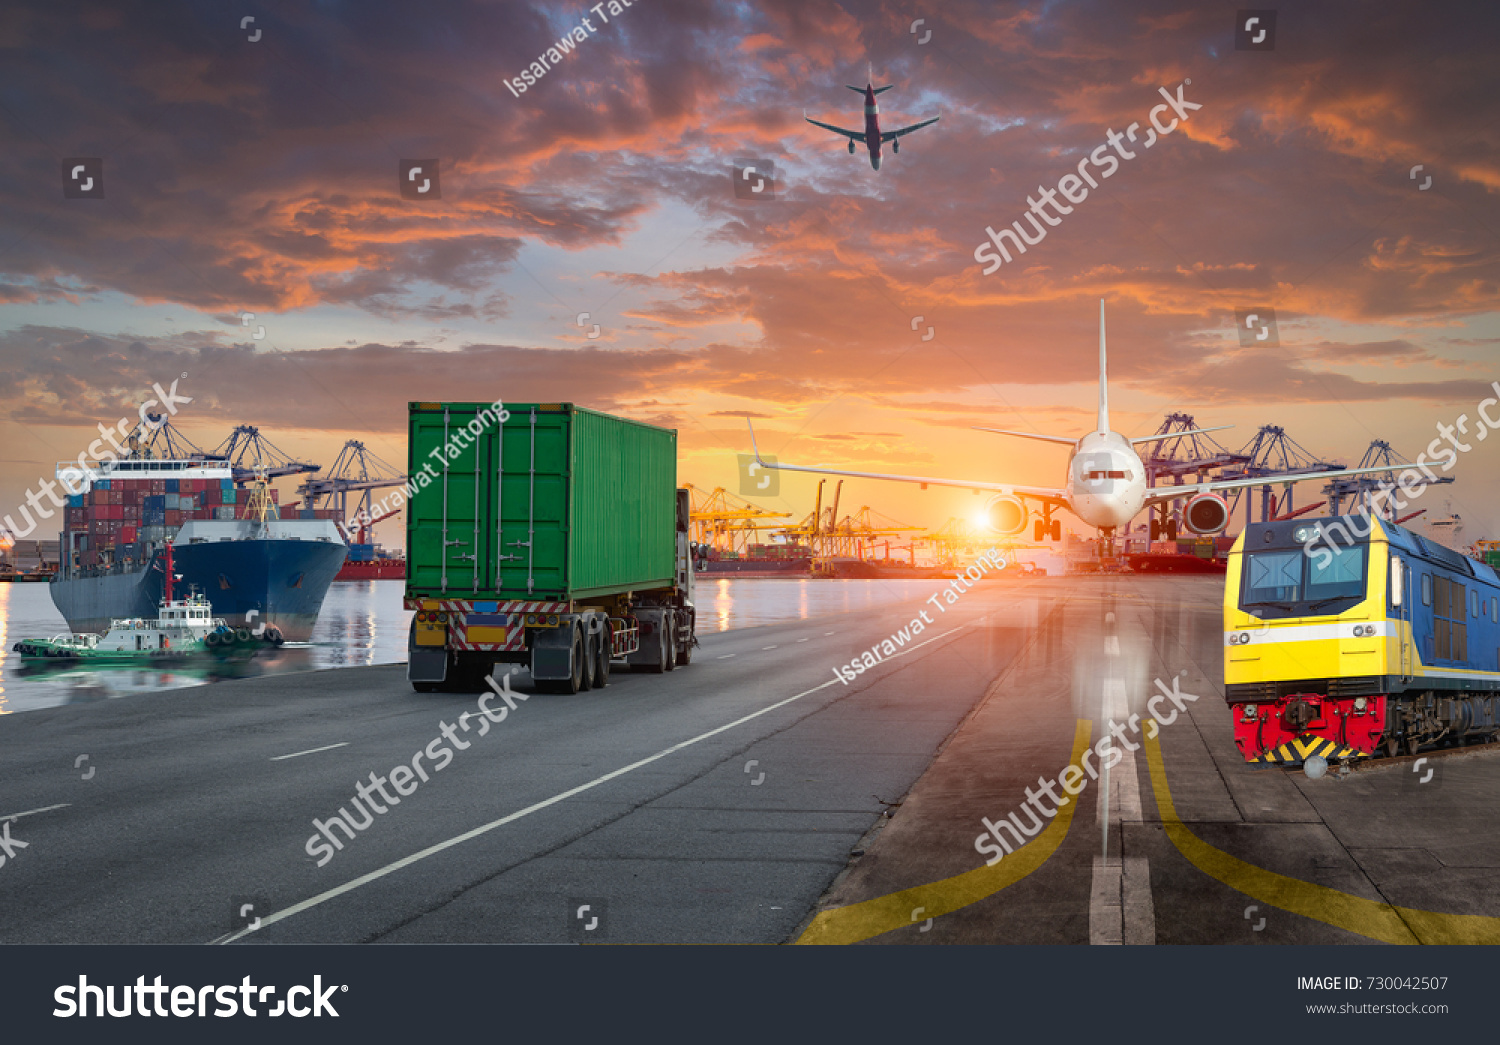 container ship in import,export port against beautiful sunset light of loading ship yard use for freight and cargo shipping vessel transport #730042507